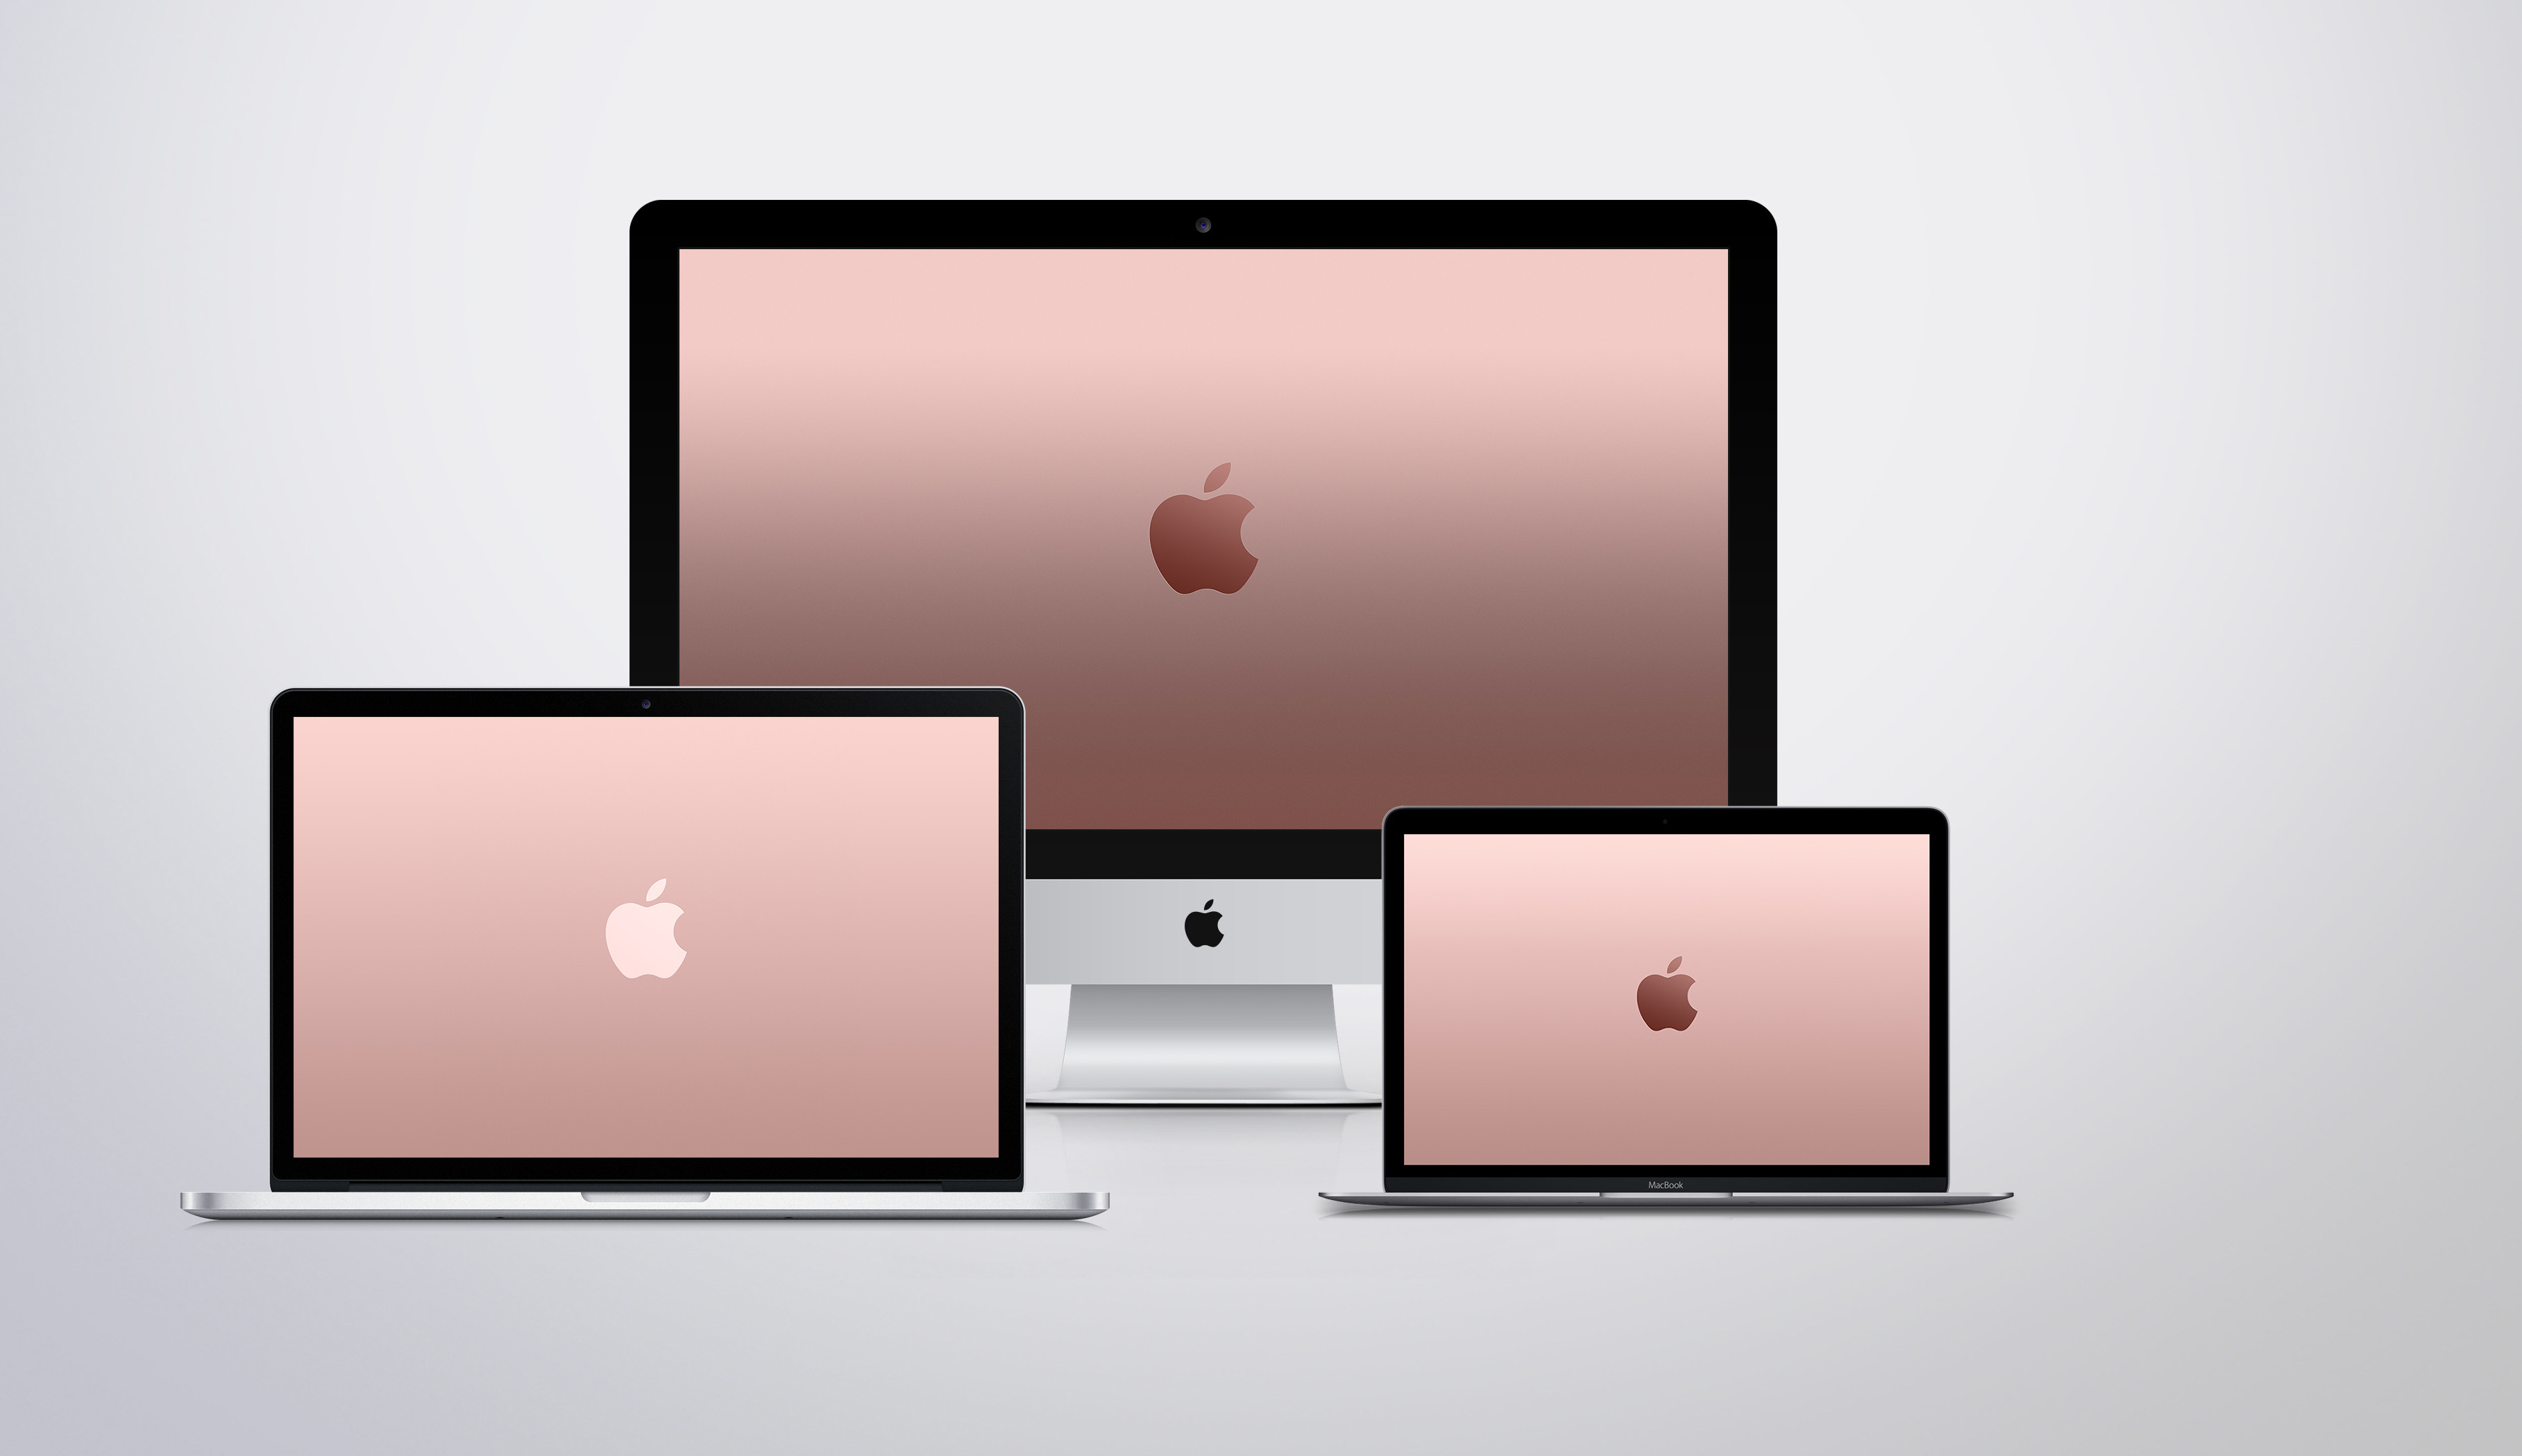 3634x2098 Apple Rose Gold Wallpapers by JasonZigrino Apple Rose Gold Wallpapers by  JasonZigrino